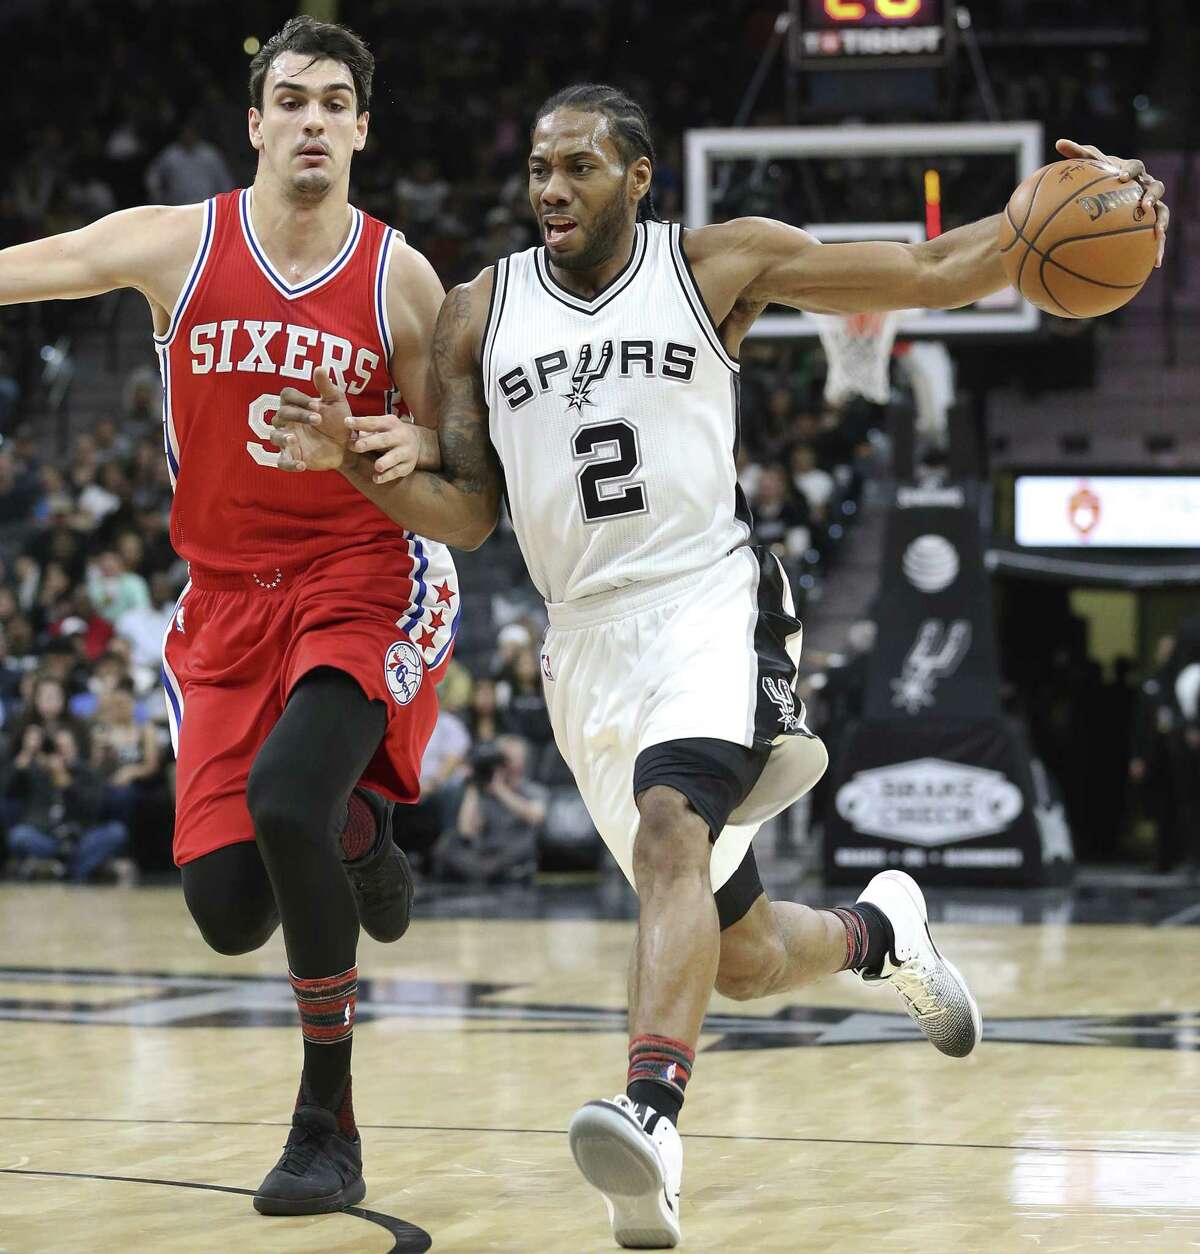 Kawhi Leonard key stat : Pick-and-roll ball handler Leonard is averaging 1.07 points per possession as the pick-and-roll ball handler, third in the league among qualified players. Despite his prowess, Leonard ranks 30th in pick-and-roll possessions per game. Bumping that up by one or two possessions per game would not drastically alter the Spurs’ offense and could help create more efficient scoring opportunities.   